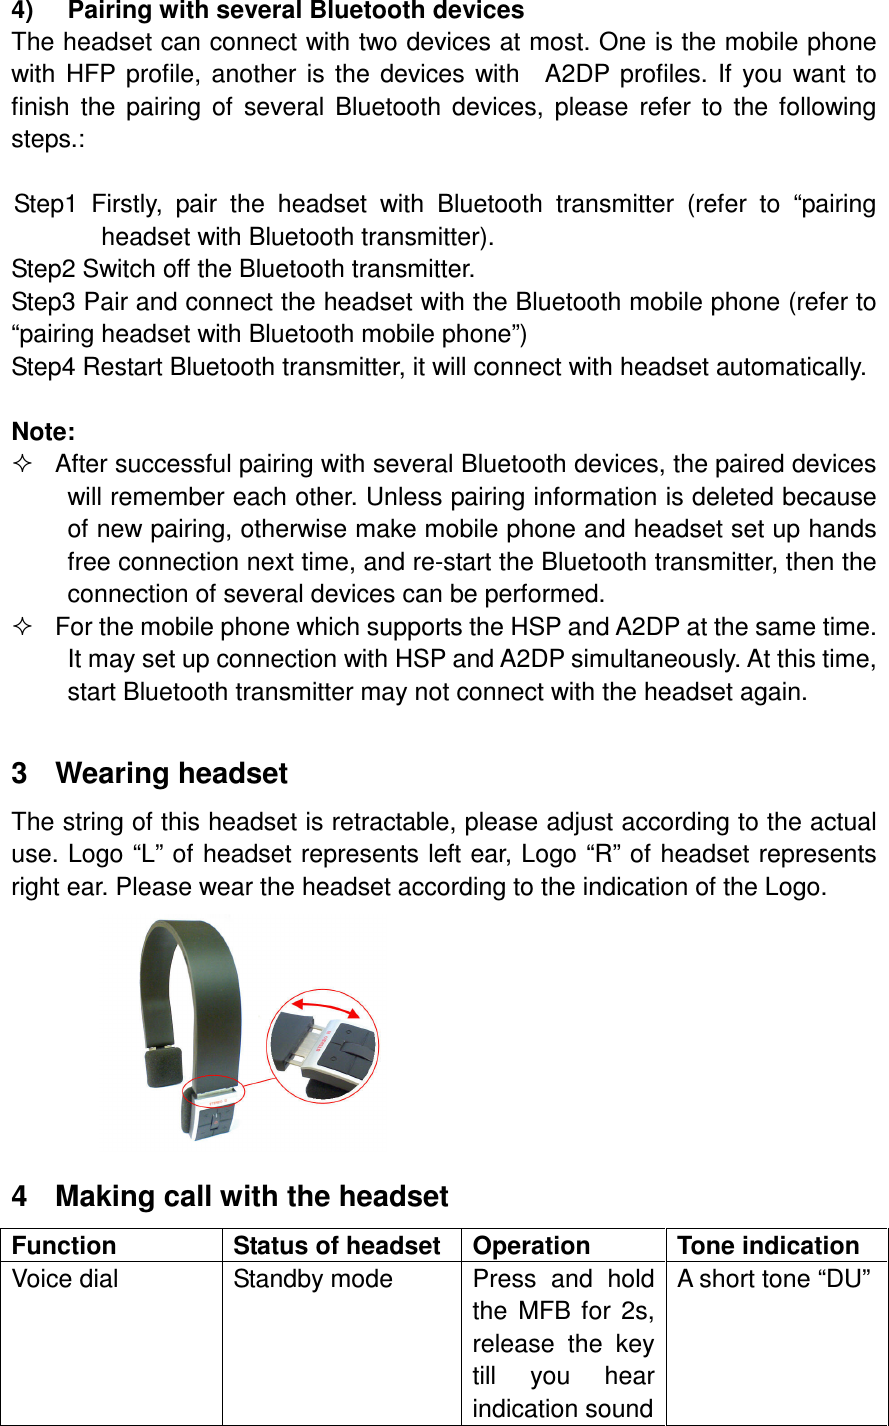 4)  Pairing with several Bluetooth devices The headset can connect with two devices at most. One is the mobile phone with  HFP  profile,  another  is  the  devices  with    A2DP  profiles.  If  you  want  to finish  the  pairing  of  several  Bluetooth  devices,  please  refer  to  the  following steps.:  Step1  Firstly,  pair  the  headset  with  Bluetooth  transmitter  (refer  to  “pairing headset with Bluetooth transmitter). Step2 Switch off the Bluetooth transmitter. Step3 Pair and connect the headset with the Bluetooth mobile phone (refer to “pairing headset with Bluetooth mobile phone”) Step4 Restart Bluetooth transmitter, it will connect with headset automatically.  Note:   After successful pairing with several Bluetooth devices, the paired devices will remember each other. Unless pairing information is deleted because of new pairing, otherwise make mobile phone and headset set up hands free connection next time, and re-start the Bluetooth transmitter, then the connection of several devices can be performed.   For the mobile phone which supports the HSP and A2DP at the same time. It may set up connection with HSP and A2DP simultaneously. At this time, start Bluetooth transmitter may not connect with the headset again.  3  Wearing headset The string of this headset is retractable, please adjust according to the actual use. Logo “L” of headset represents left ear, Logo “R” of headset represents right ear. Please wear the headset according to the indication of the Logo.  4  Making call with the headset Function  Status of headset  Operation  Tone indication Voice dial  Standby mode  Press  and  hold the  MFB  for  2s, release  the  key till  you  hear indication sound A short tone “DU” 